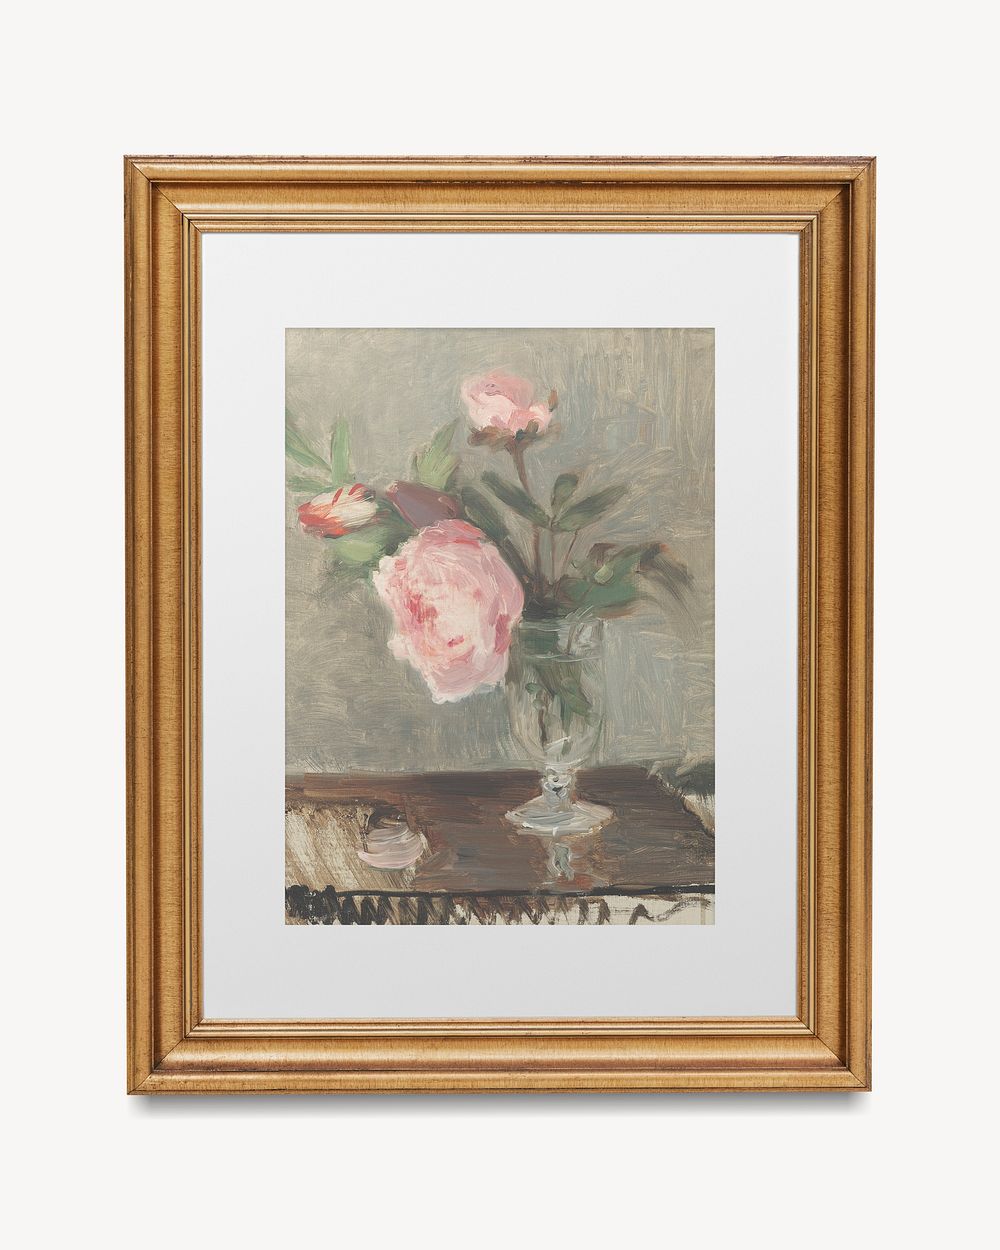 Berthe Morisot's Rose vintage illustration in picture frame, remixed by rawpixel